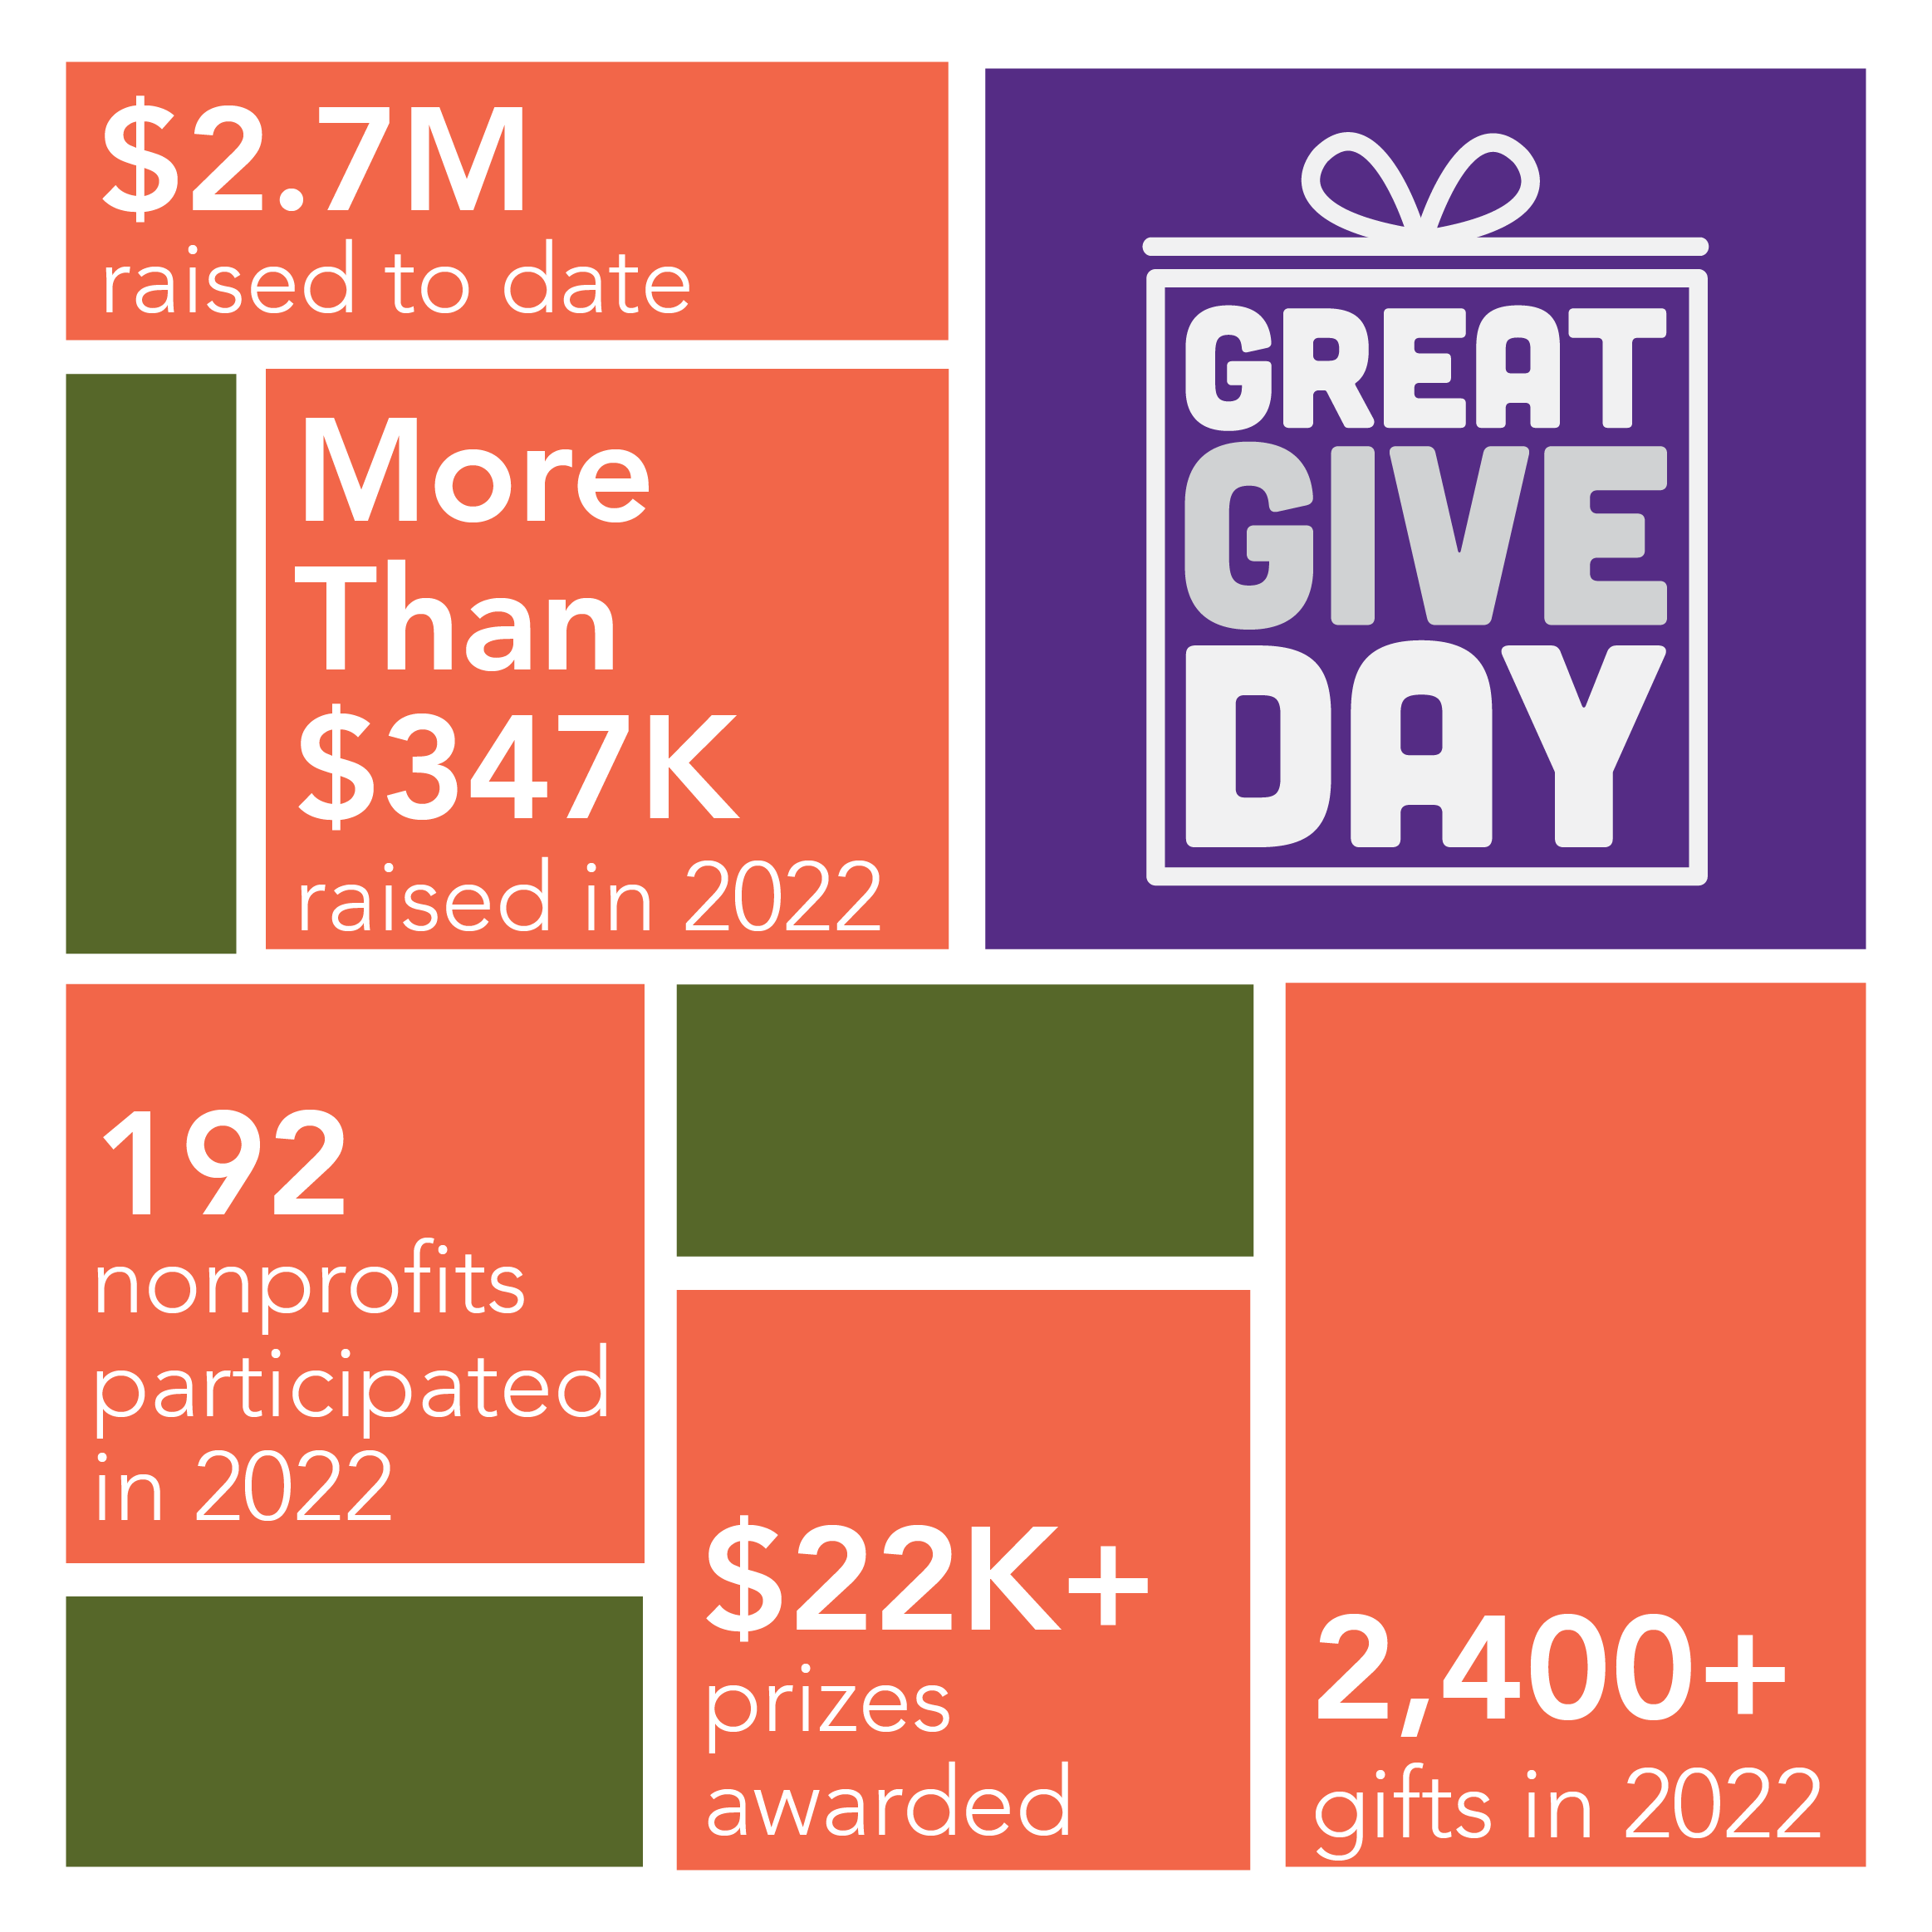 Great Give Day Donor Feedback Community Foundation of Greater Dubuque